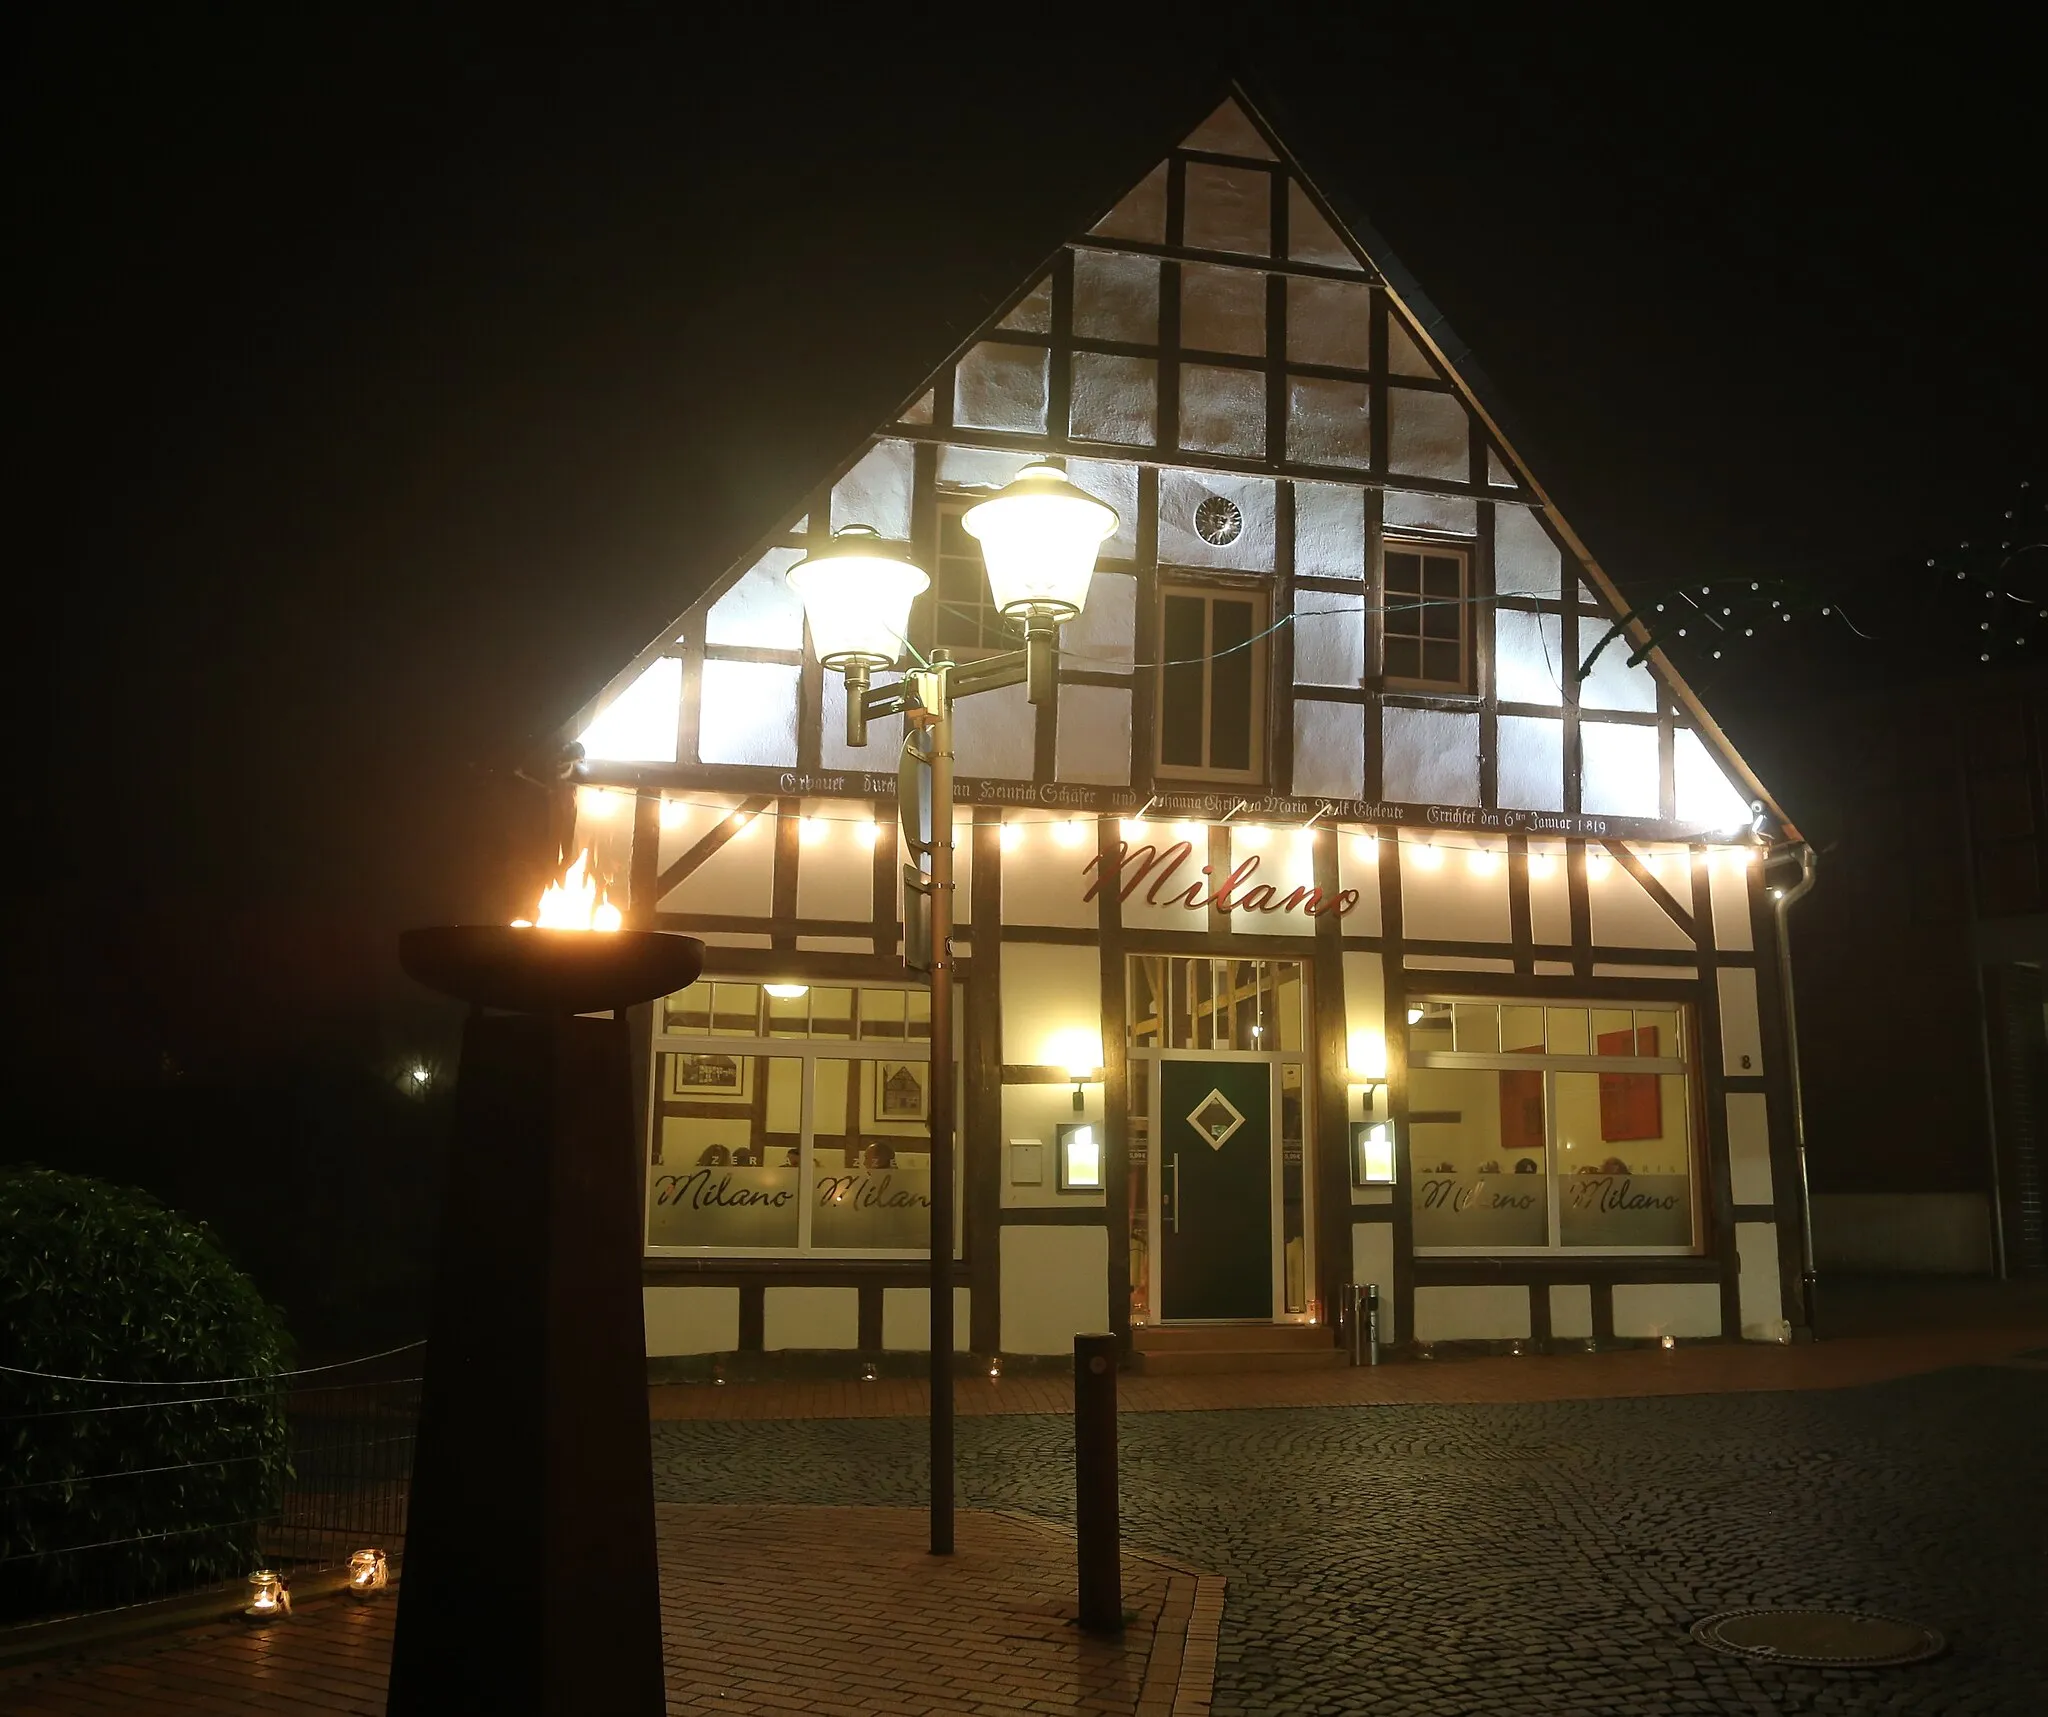 Photo showing: The restaurant Milano in the city centre of Westerkappeln, Kreis Steinfurt, North Rhine-Westphalia, Germany. The timber framed building and streets were illuminated on the occasion of the Moonlight Shopping event.